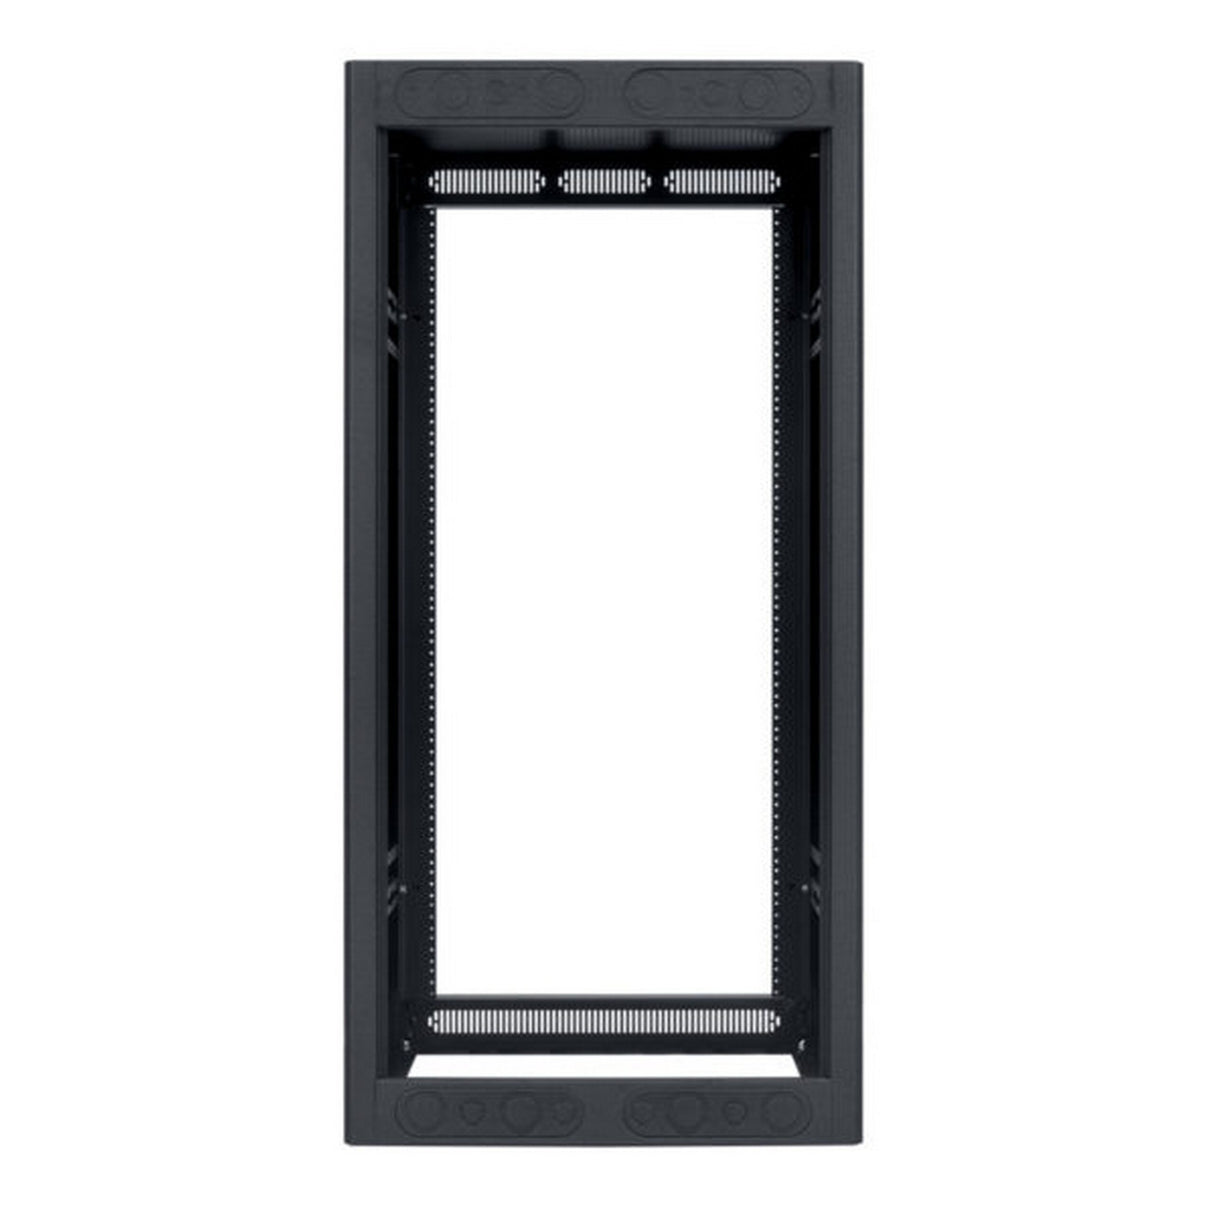 Lowell LER-2422-LRD Enclosed Rack without Rear Door, 24 x 22 Inch